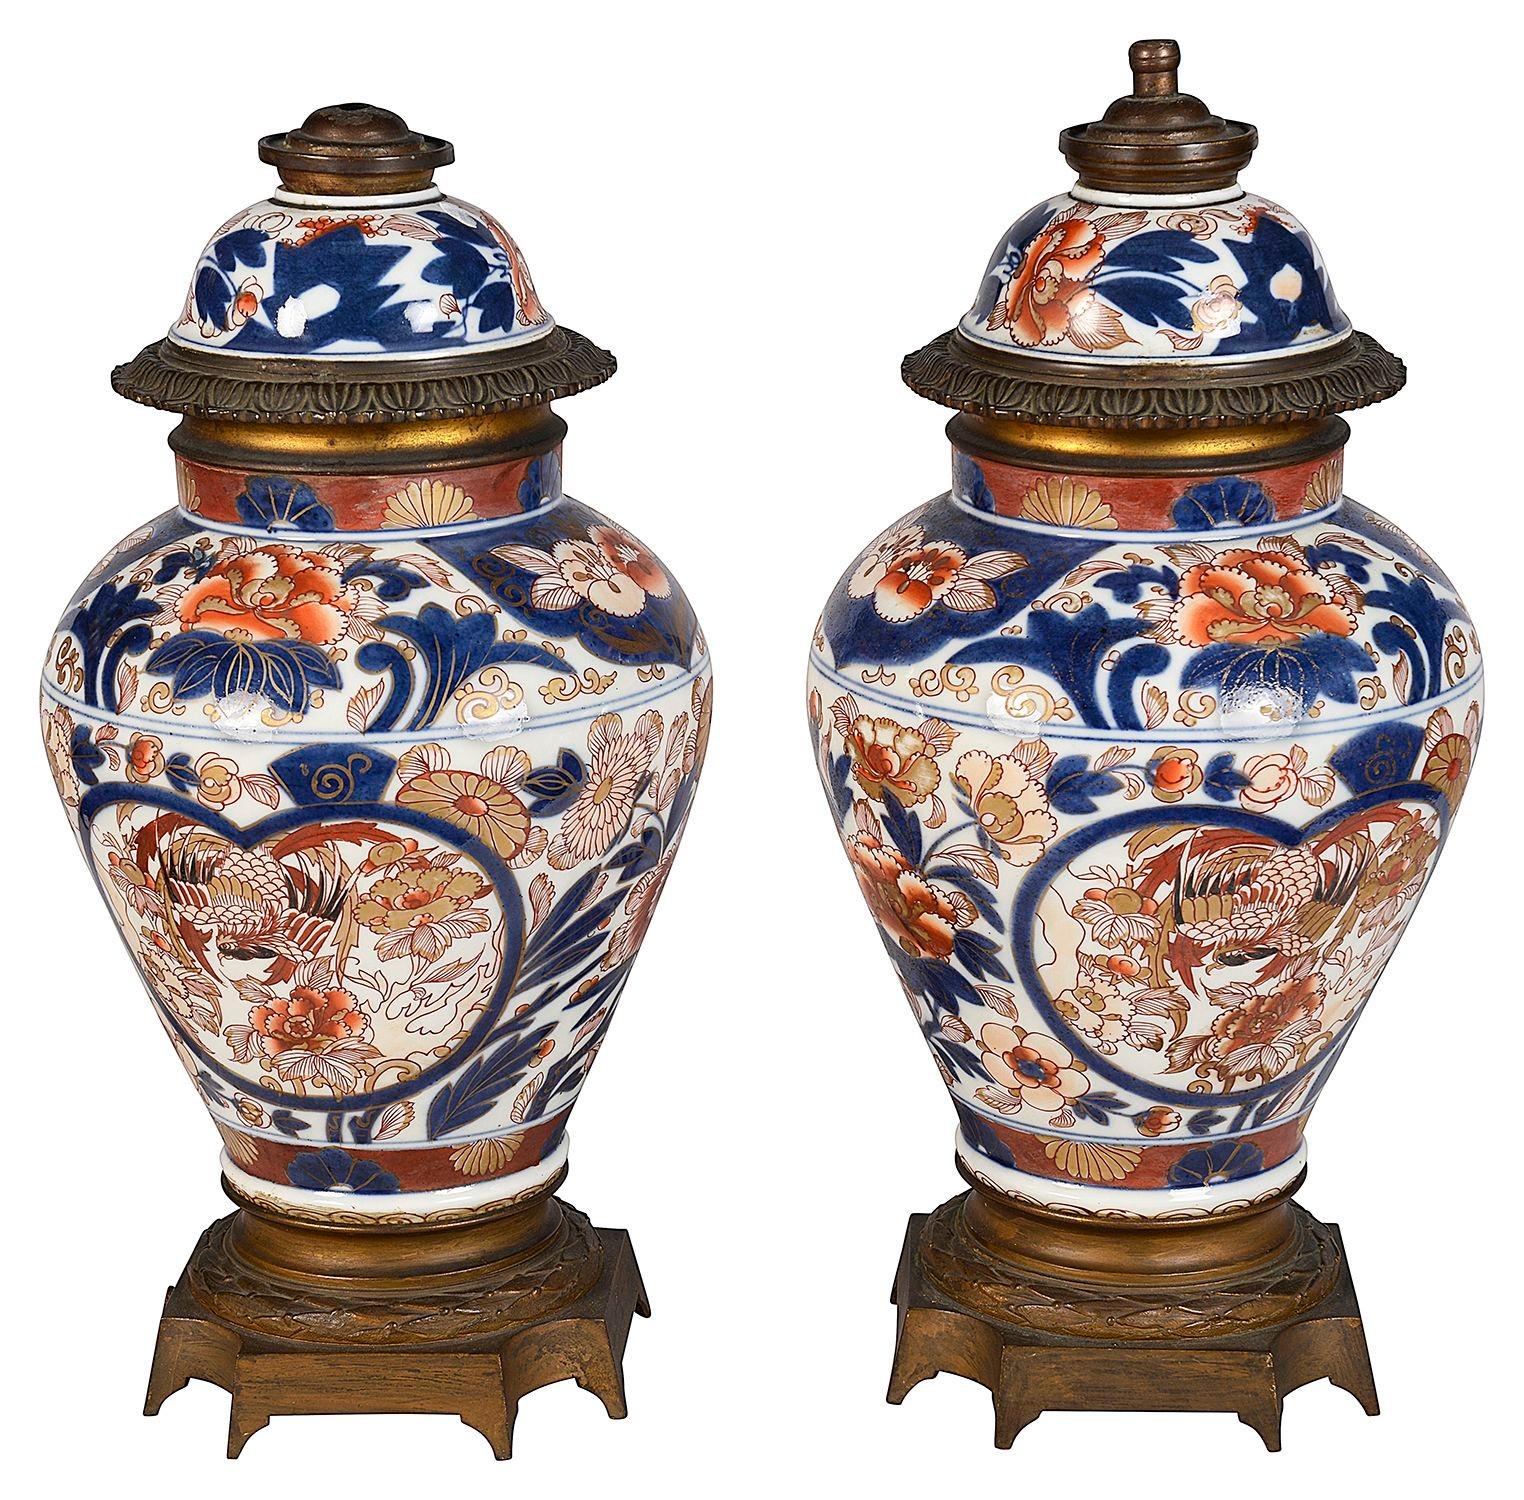 Pair of good quality 19th Century Japanese Imari lidded vases / lamps, each with gilded ormolu mounts, classical blue and orange scrolling foliate decoration, circa 1880.
Batch 73 c/c CKZN  G9927/23